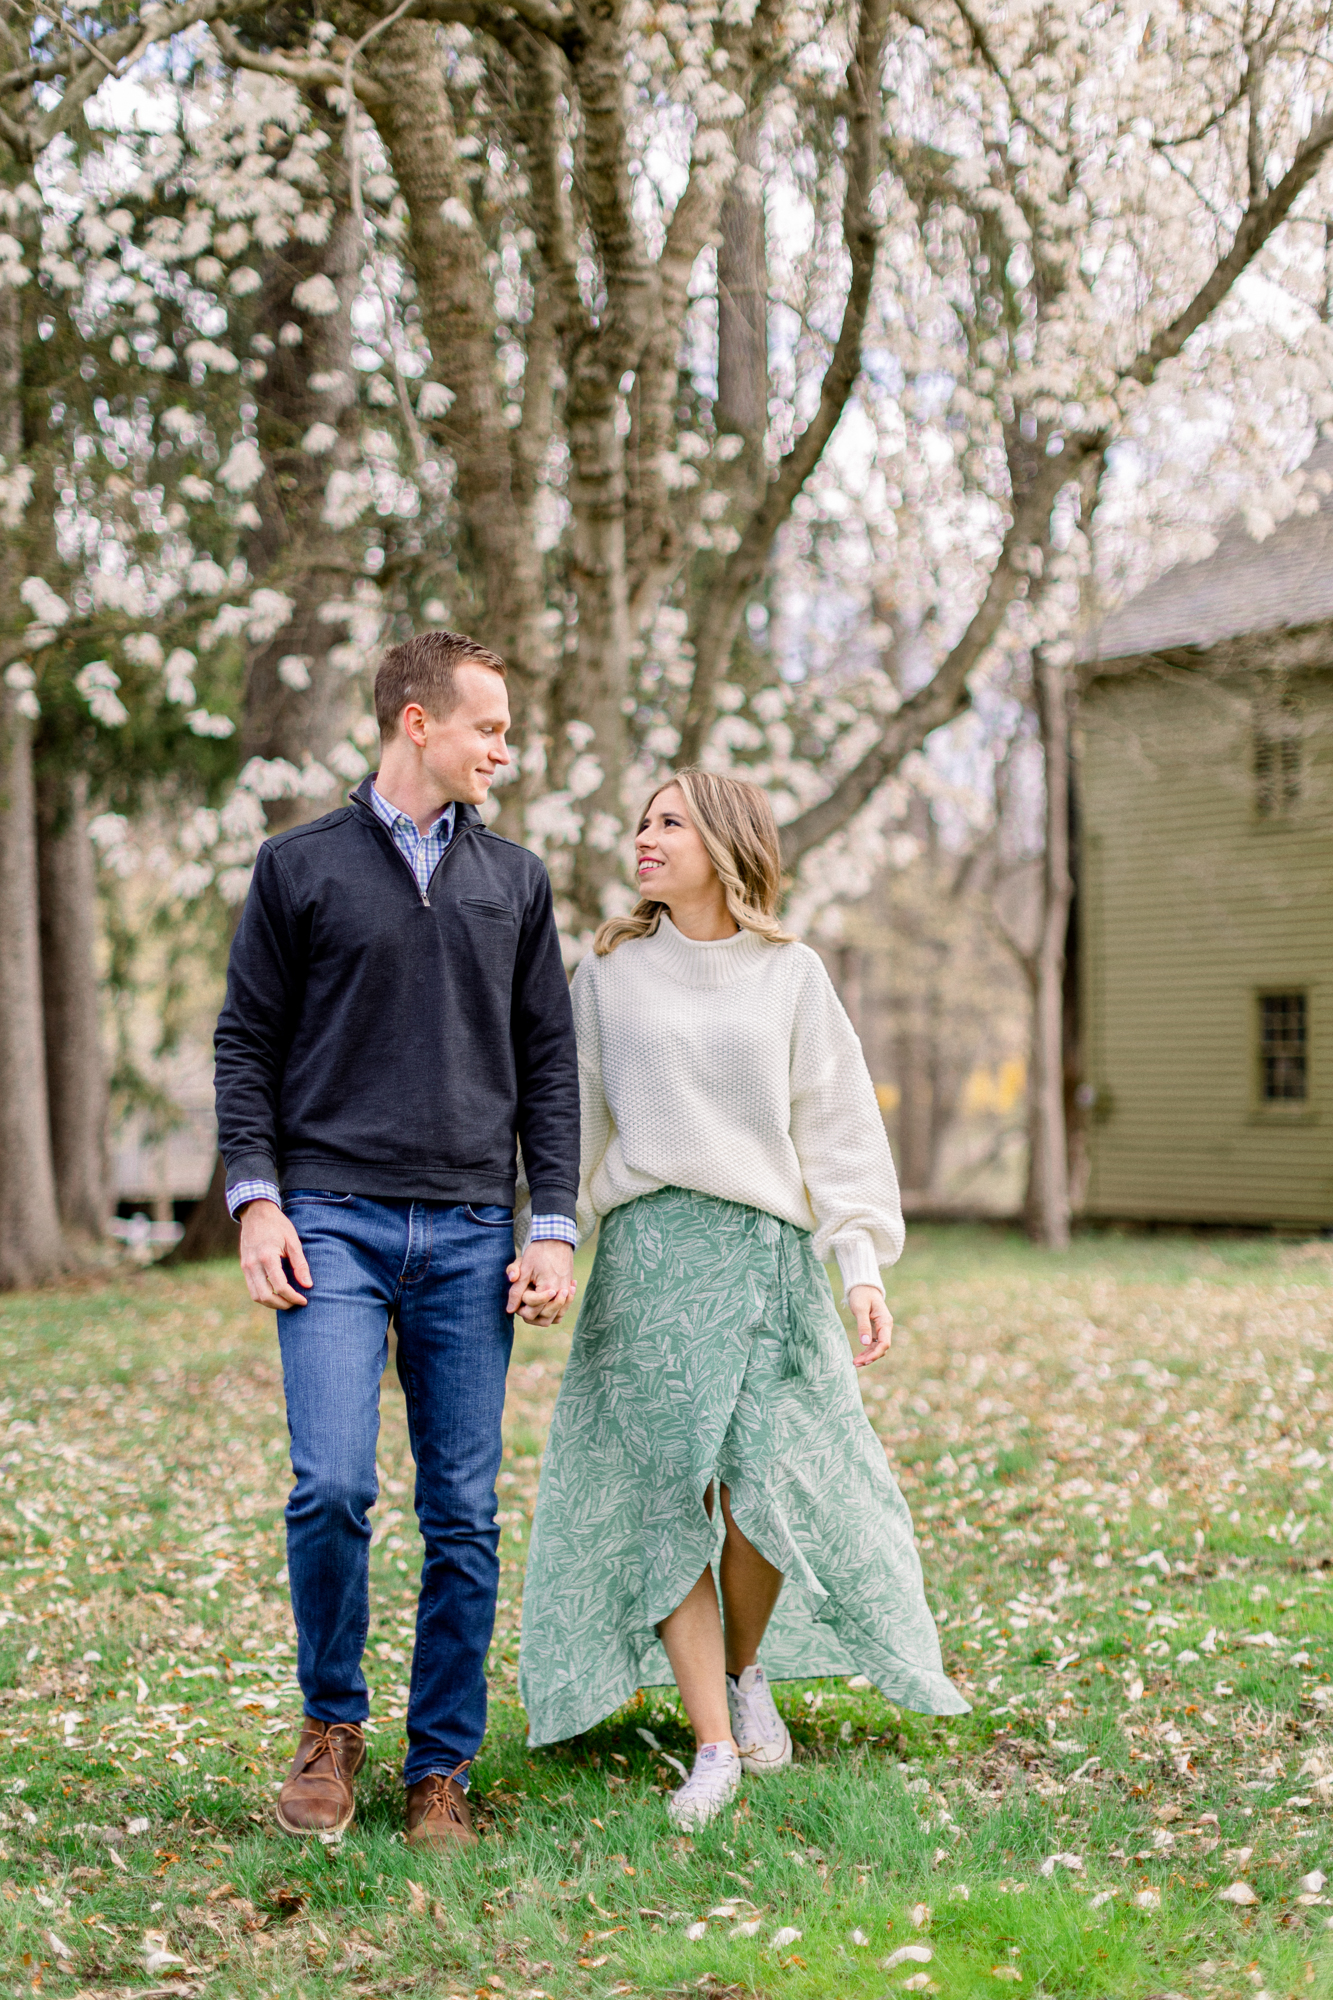 Beautiful New York Engagement Photography with Spring Blossoms